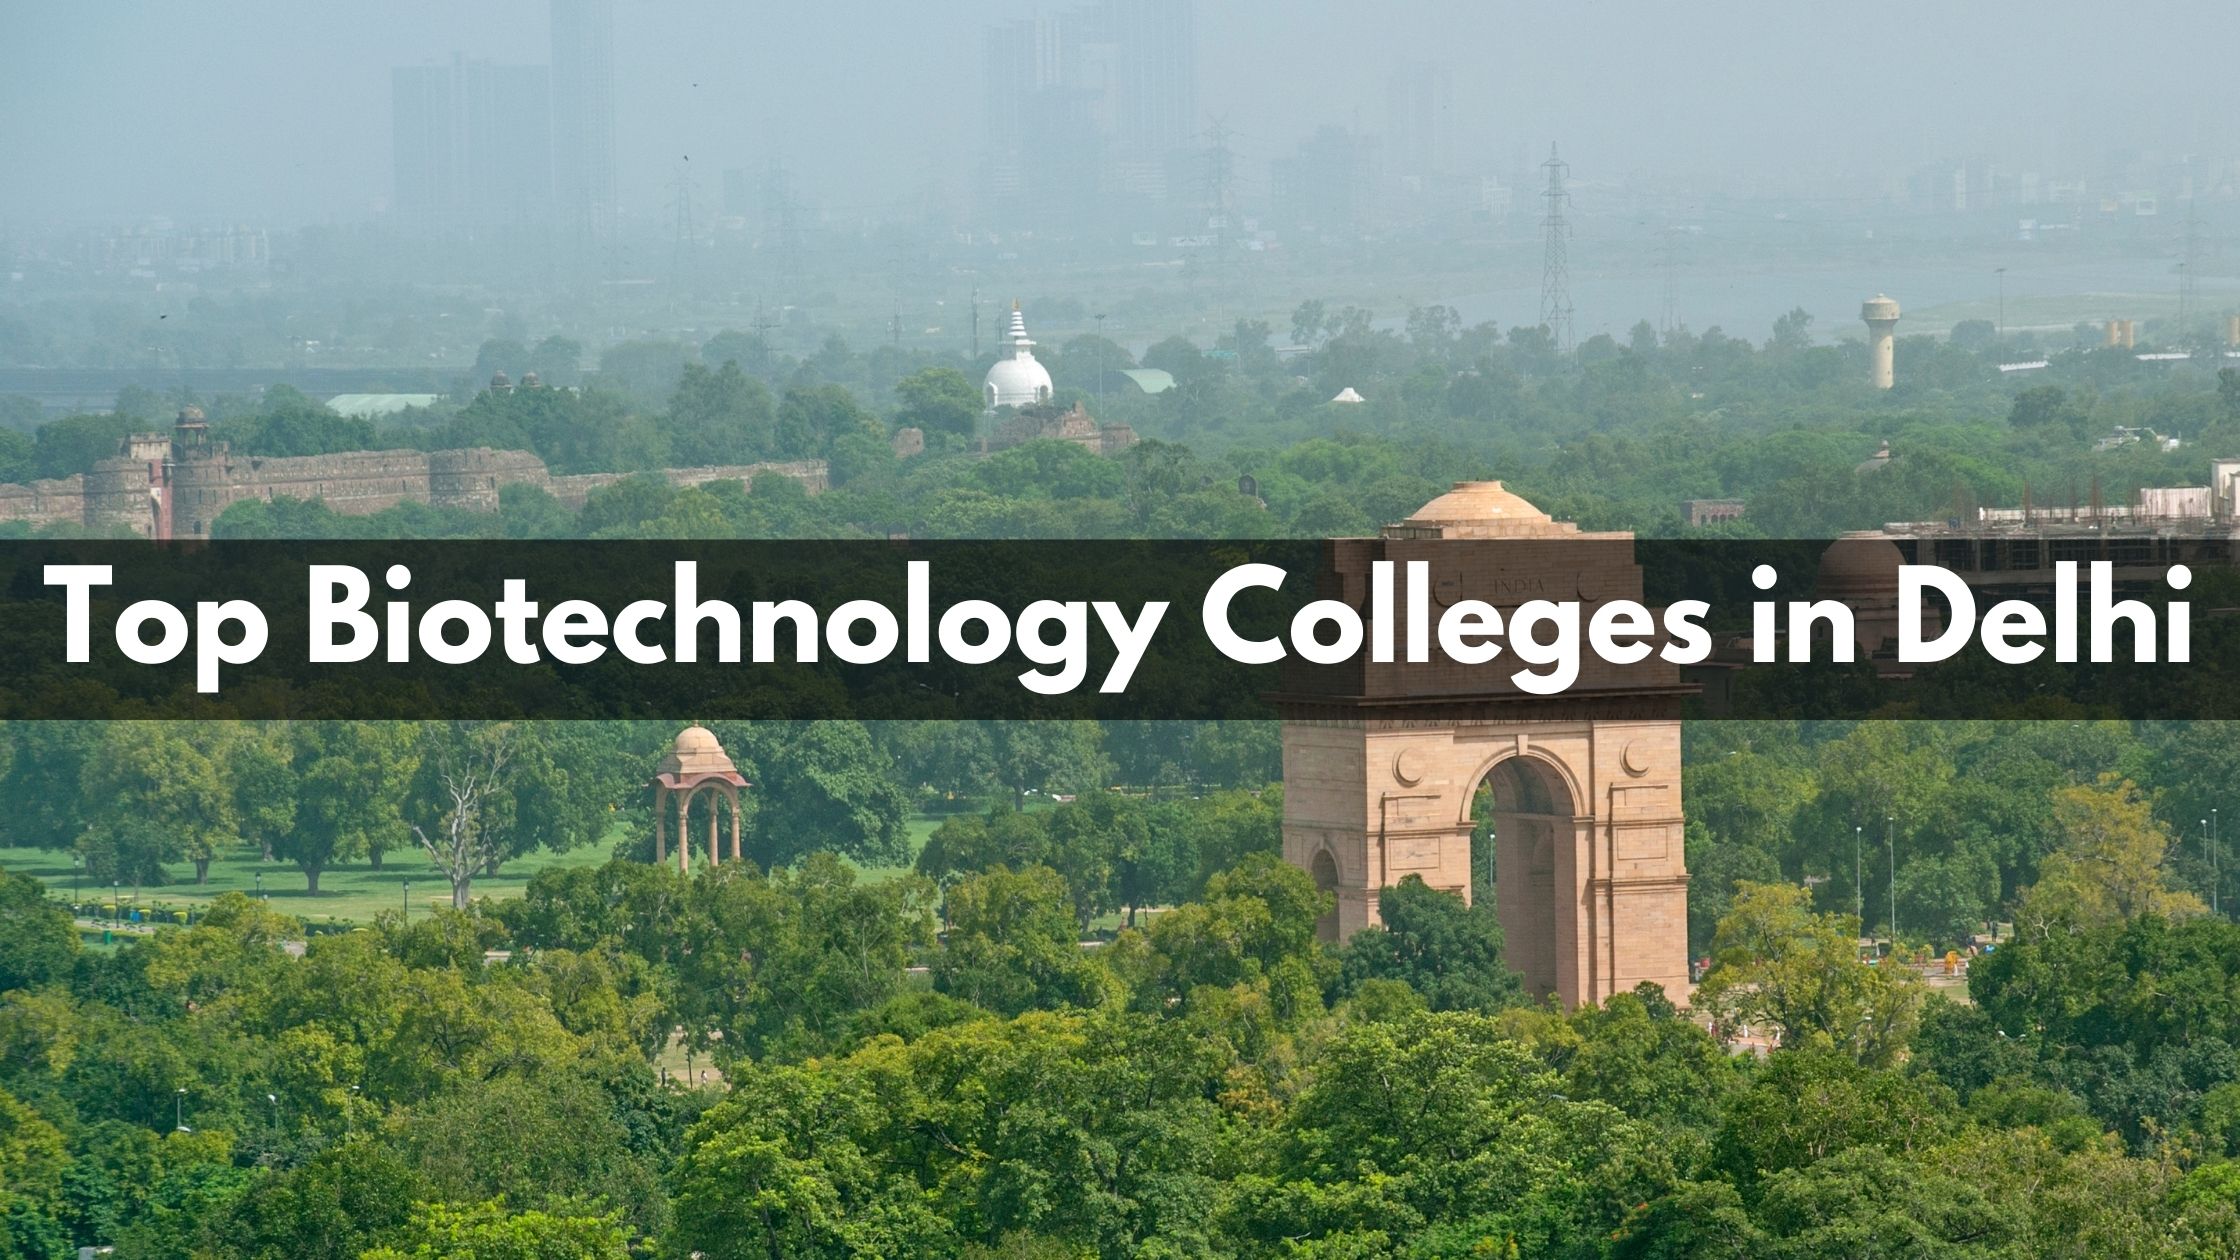 Top Biotechnology Colleges in Delhi